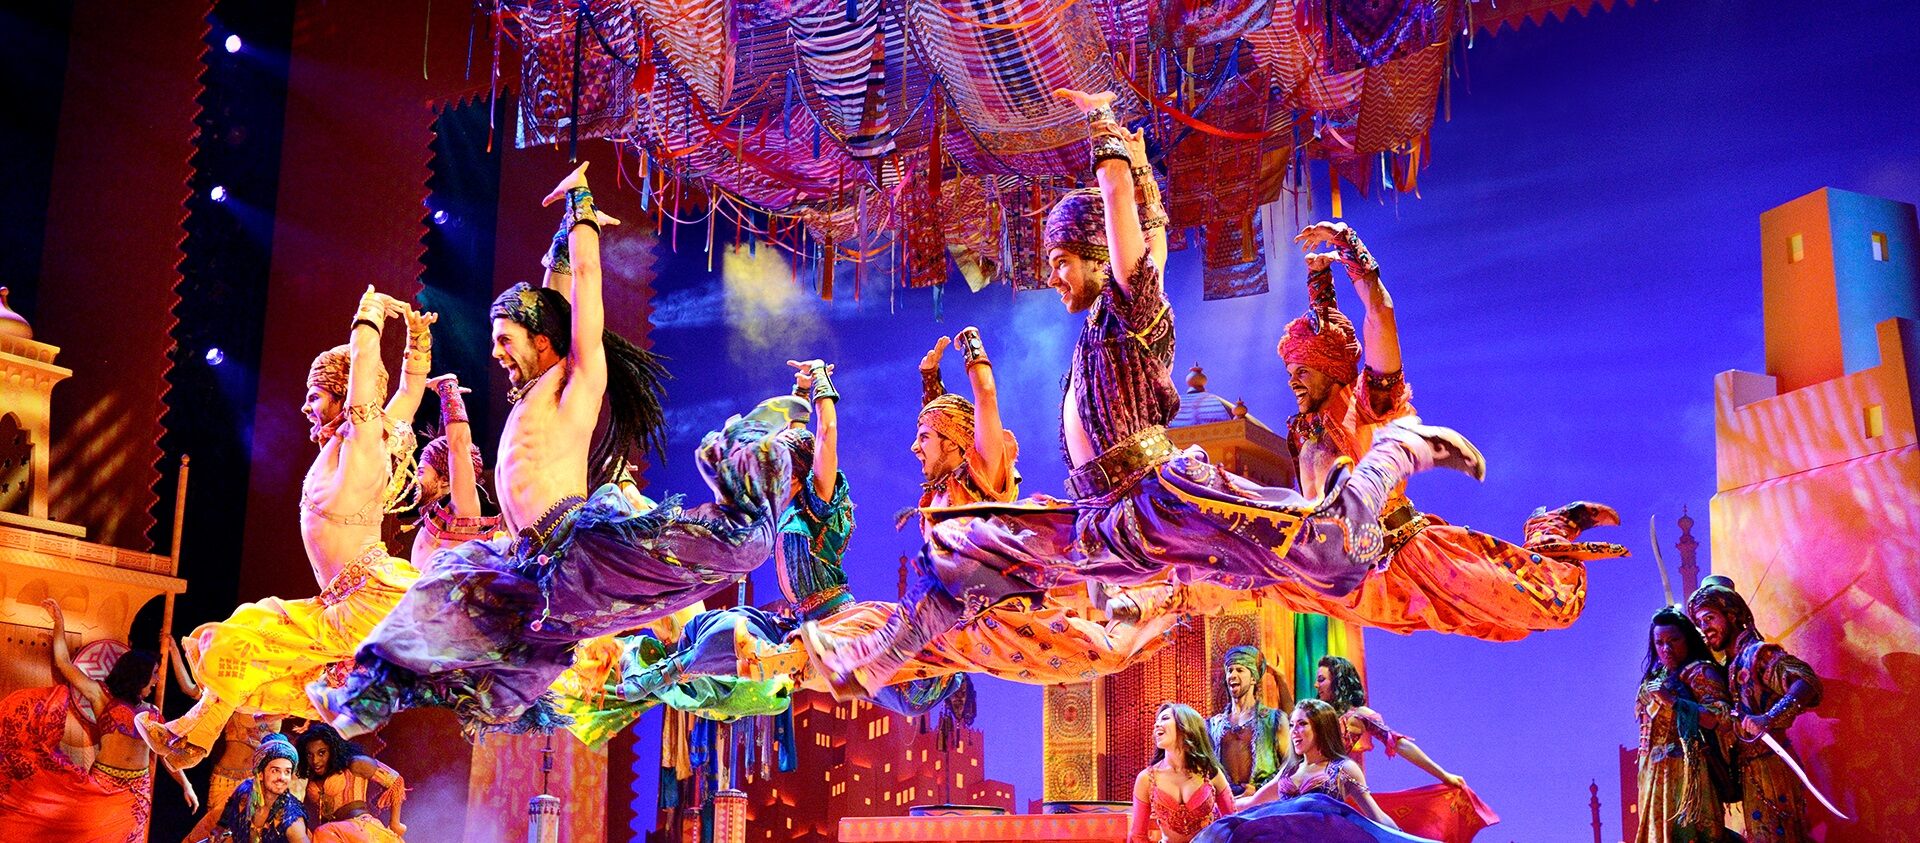 Aladdin Musical Shines and Dazzles on Stage, Literally and Metaphorically - Alvinology